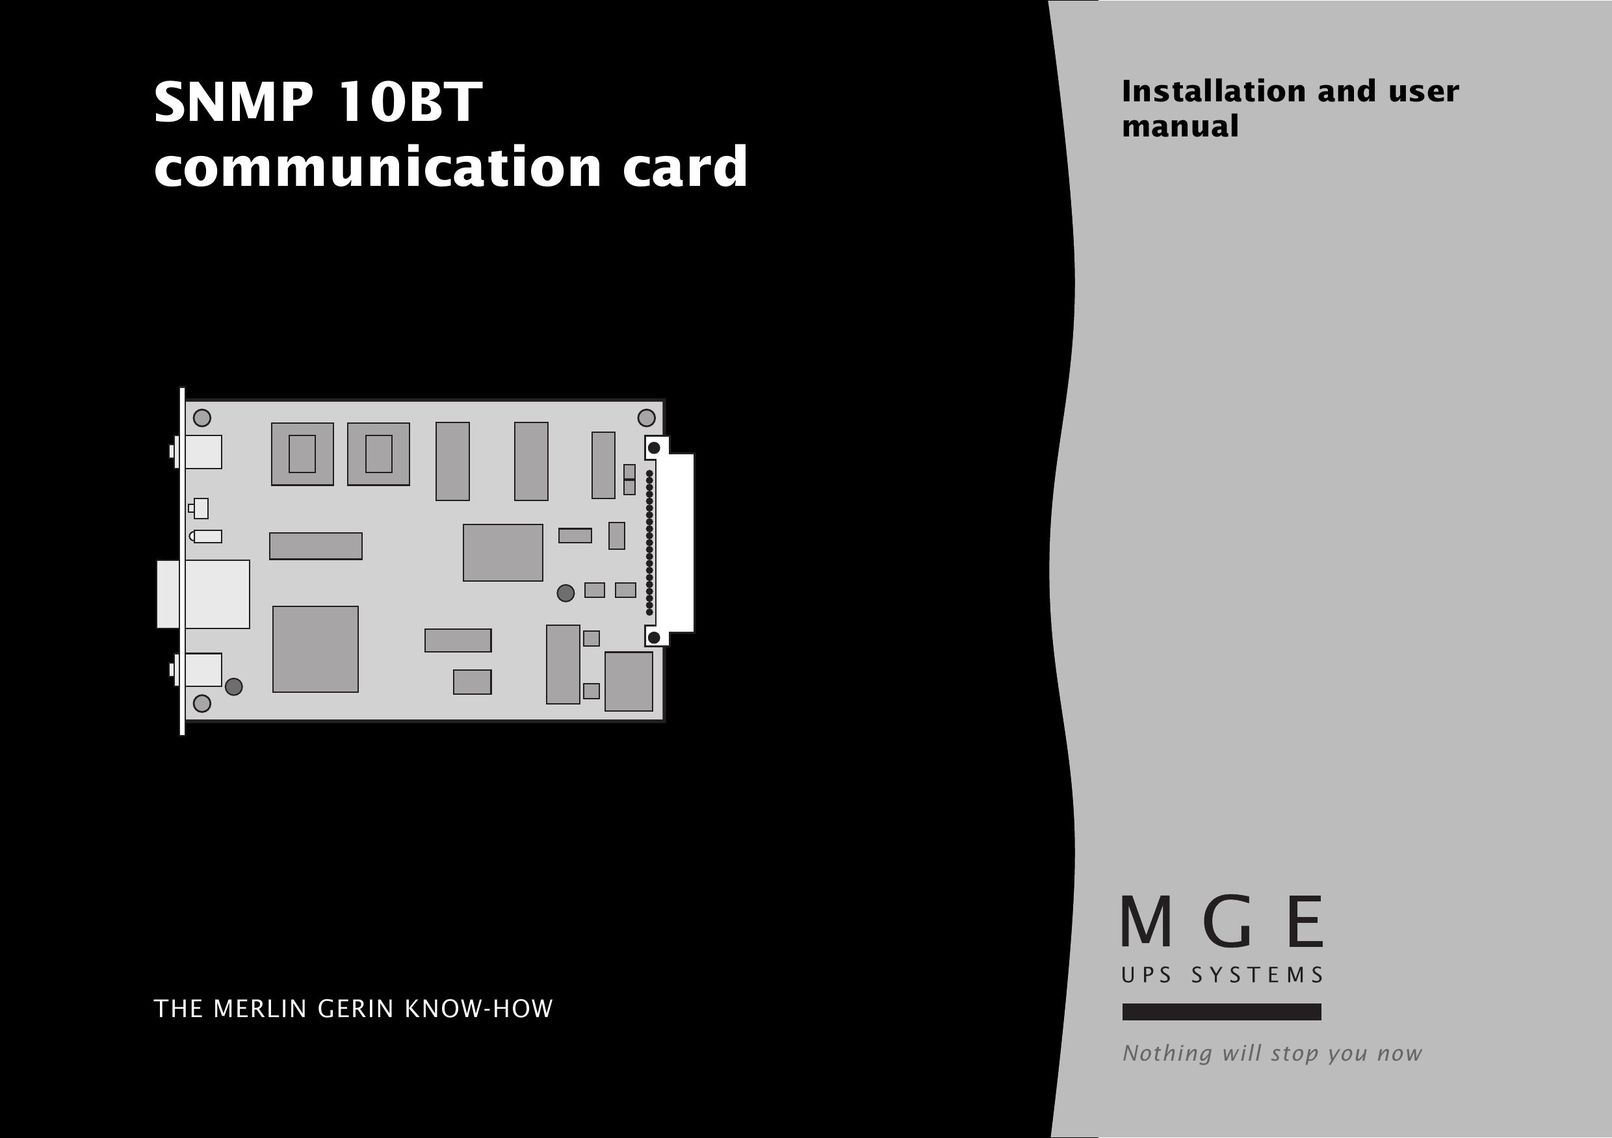 MGE UPS Systems SNMP 10BT Network Card User Manual